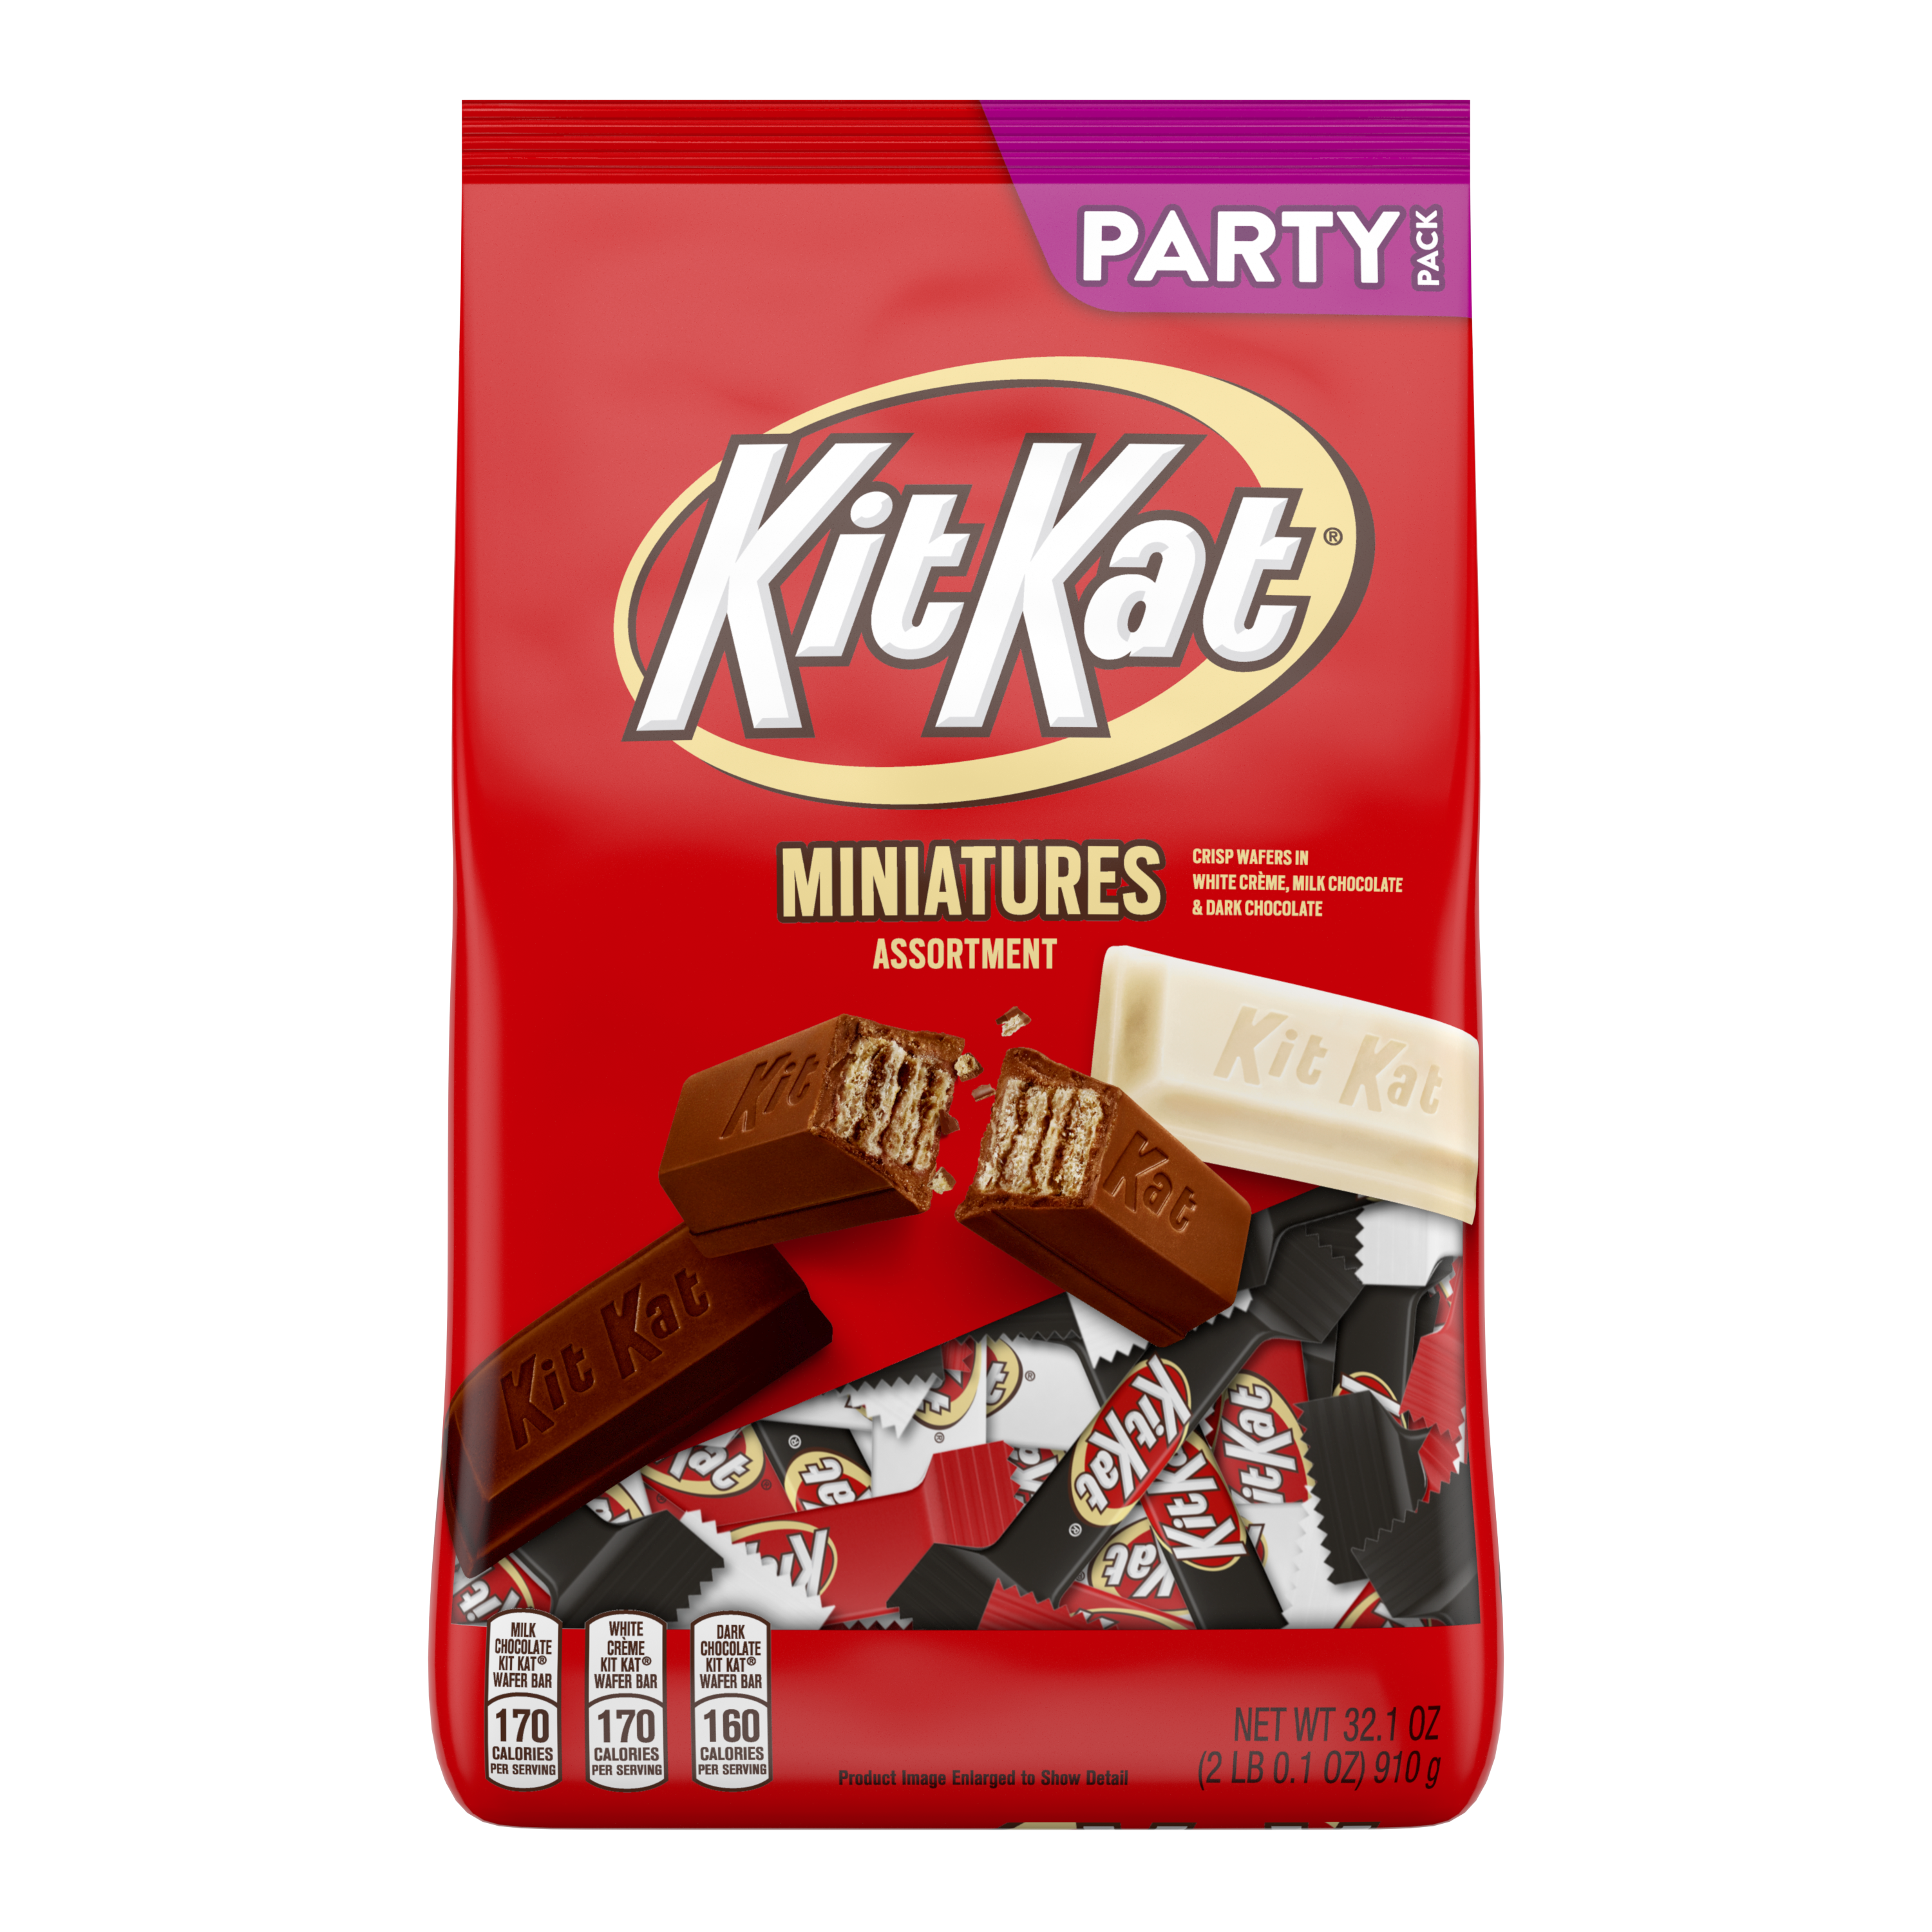 KIT KAT® Miniatures Assortment, 32.1 oz pack - Front of Package